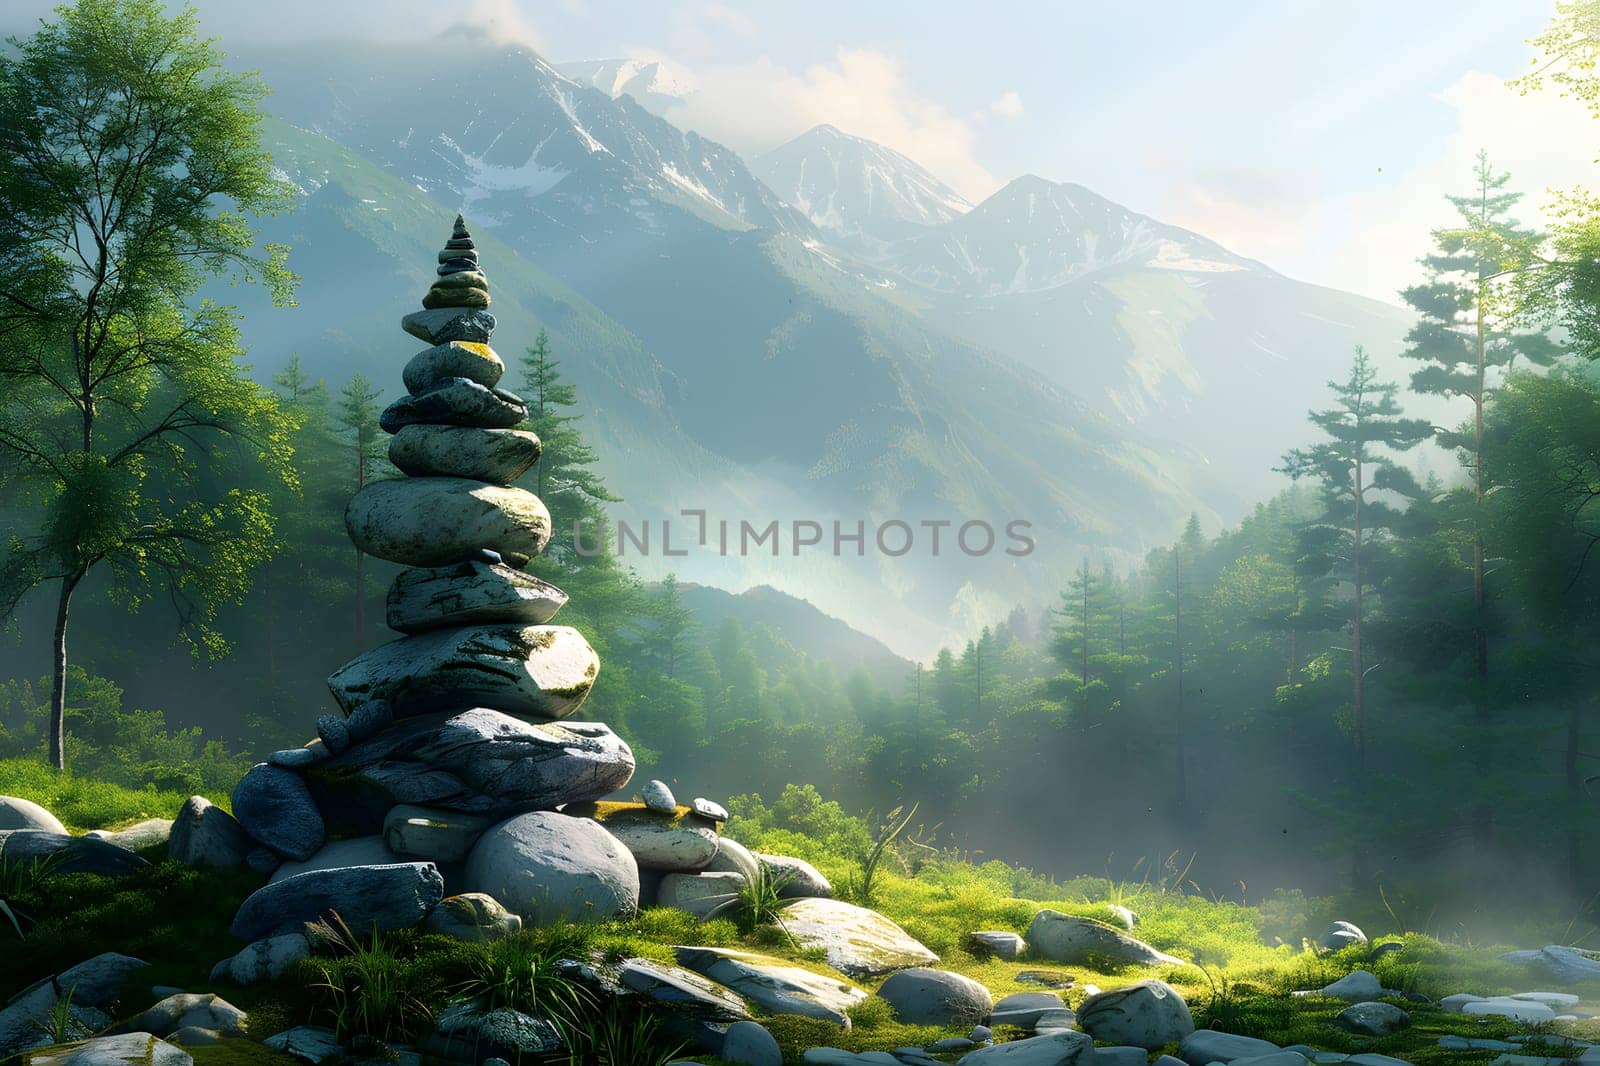 A stack of rocks in a forest clearing with mountains in the background by Nadtochiy